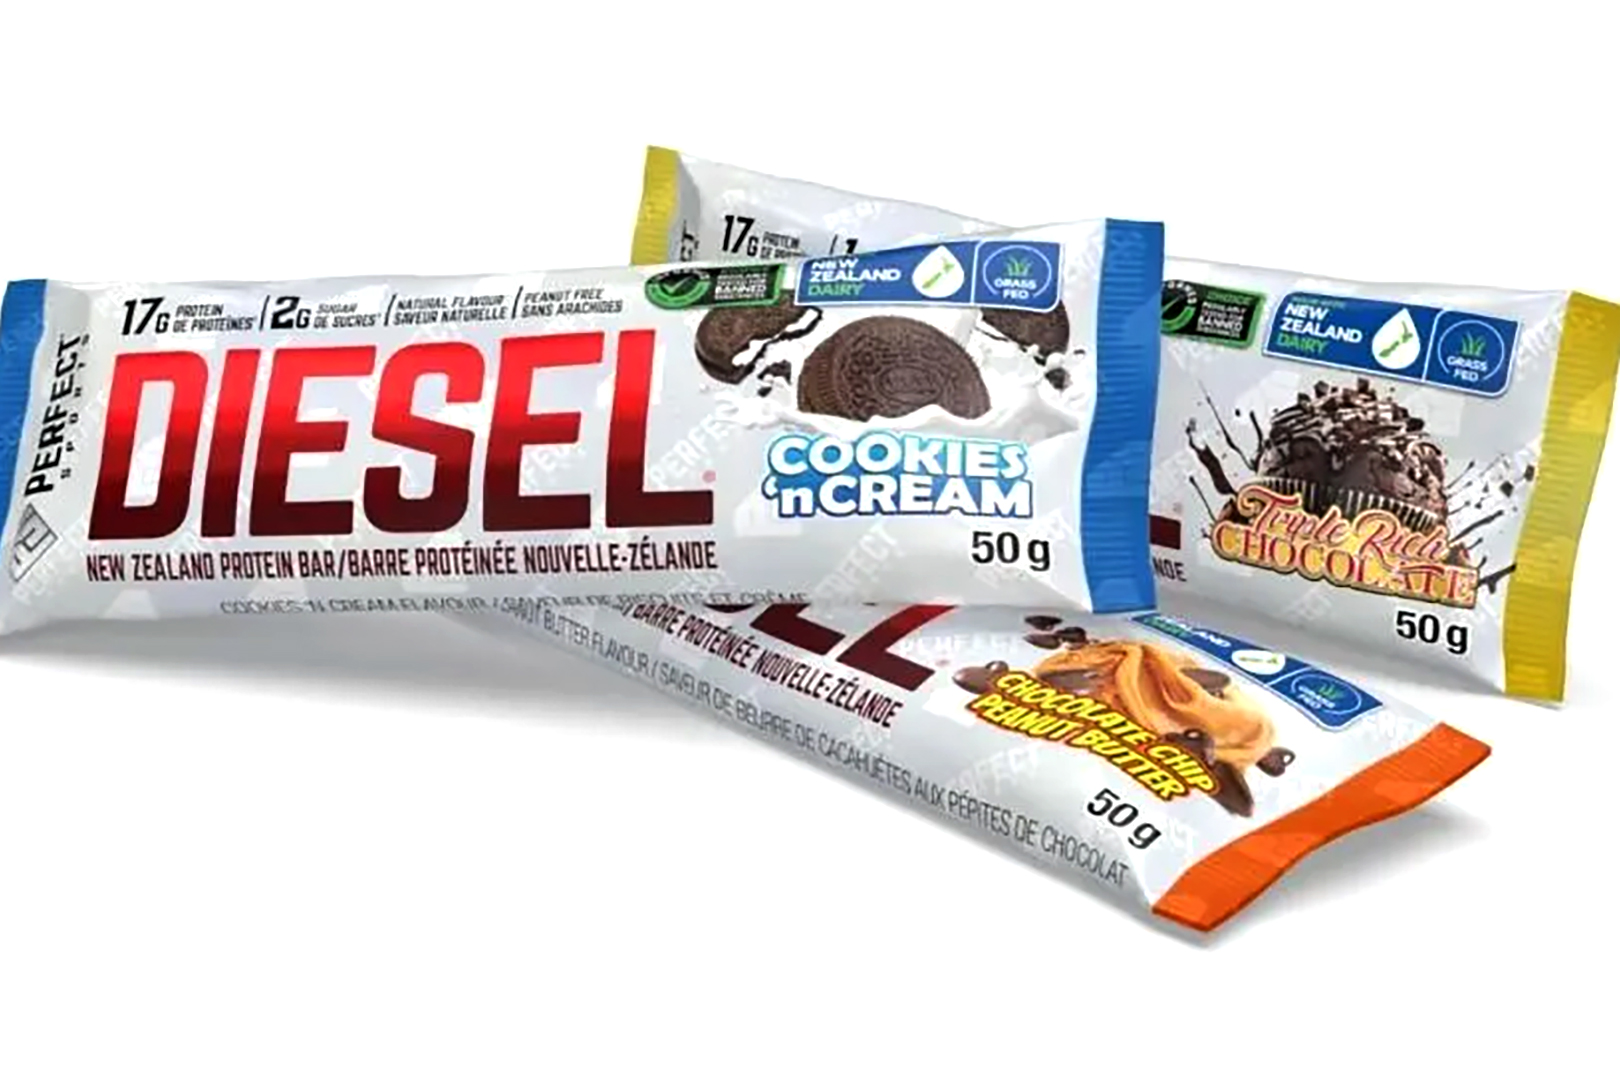 Successful Launch Of Diesel Protein Bar